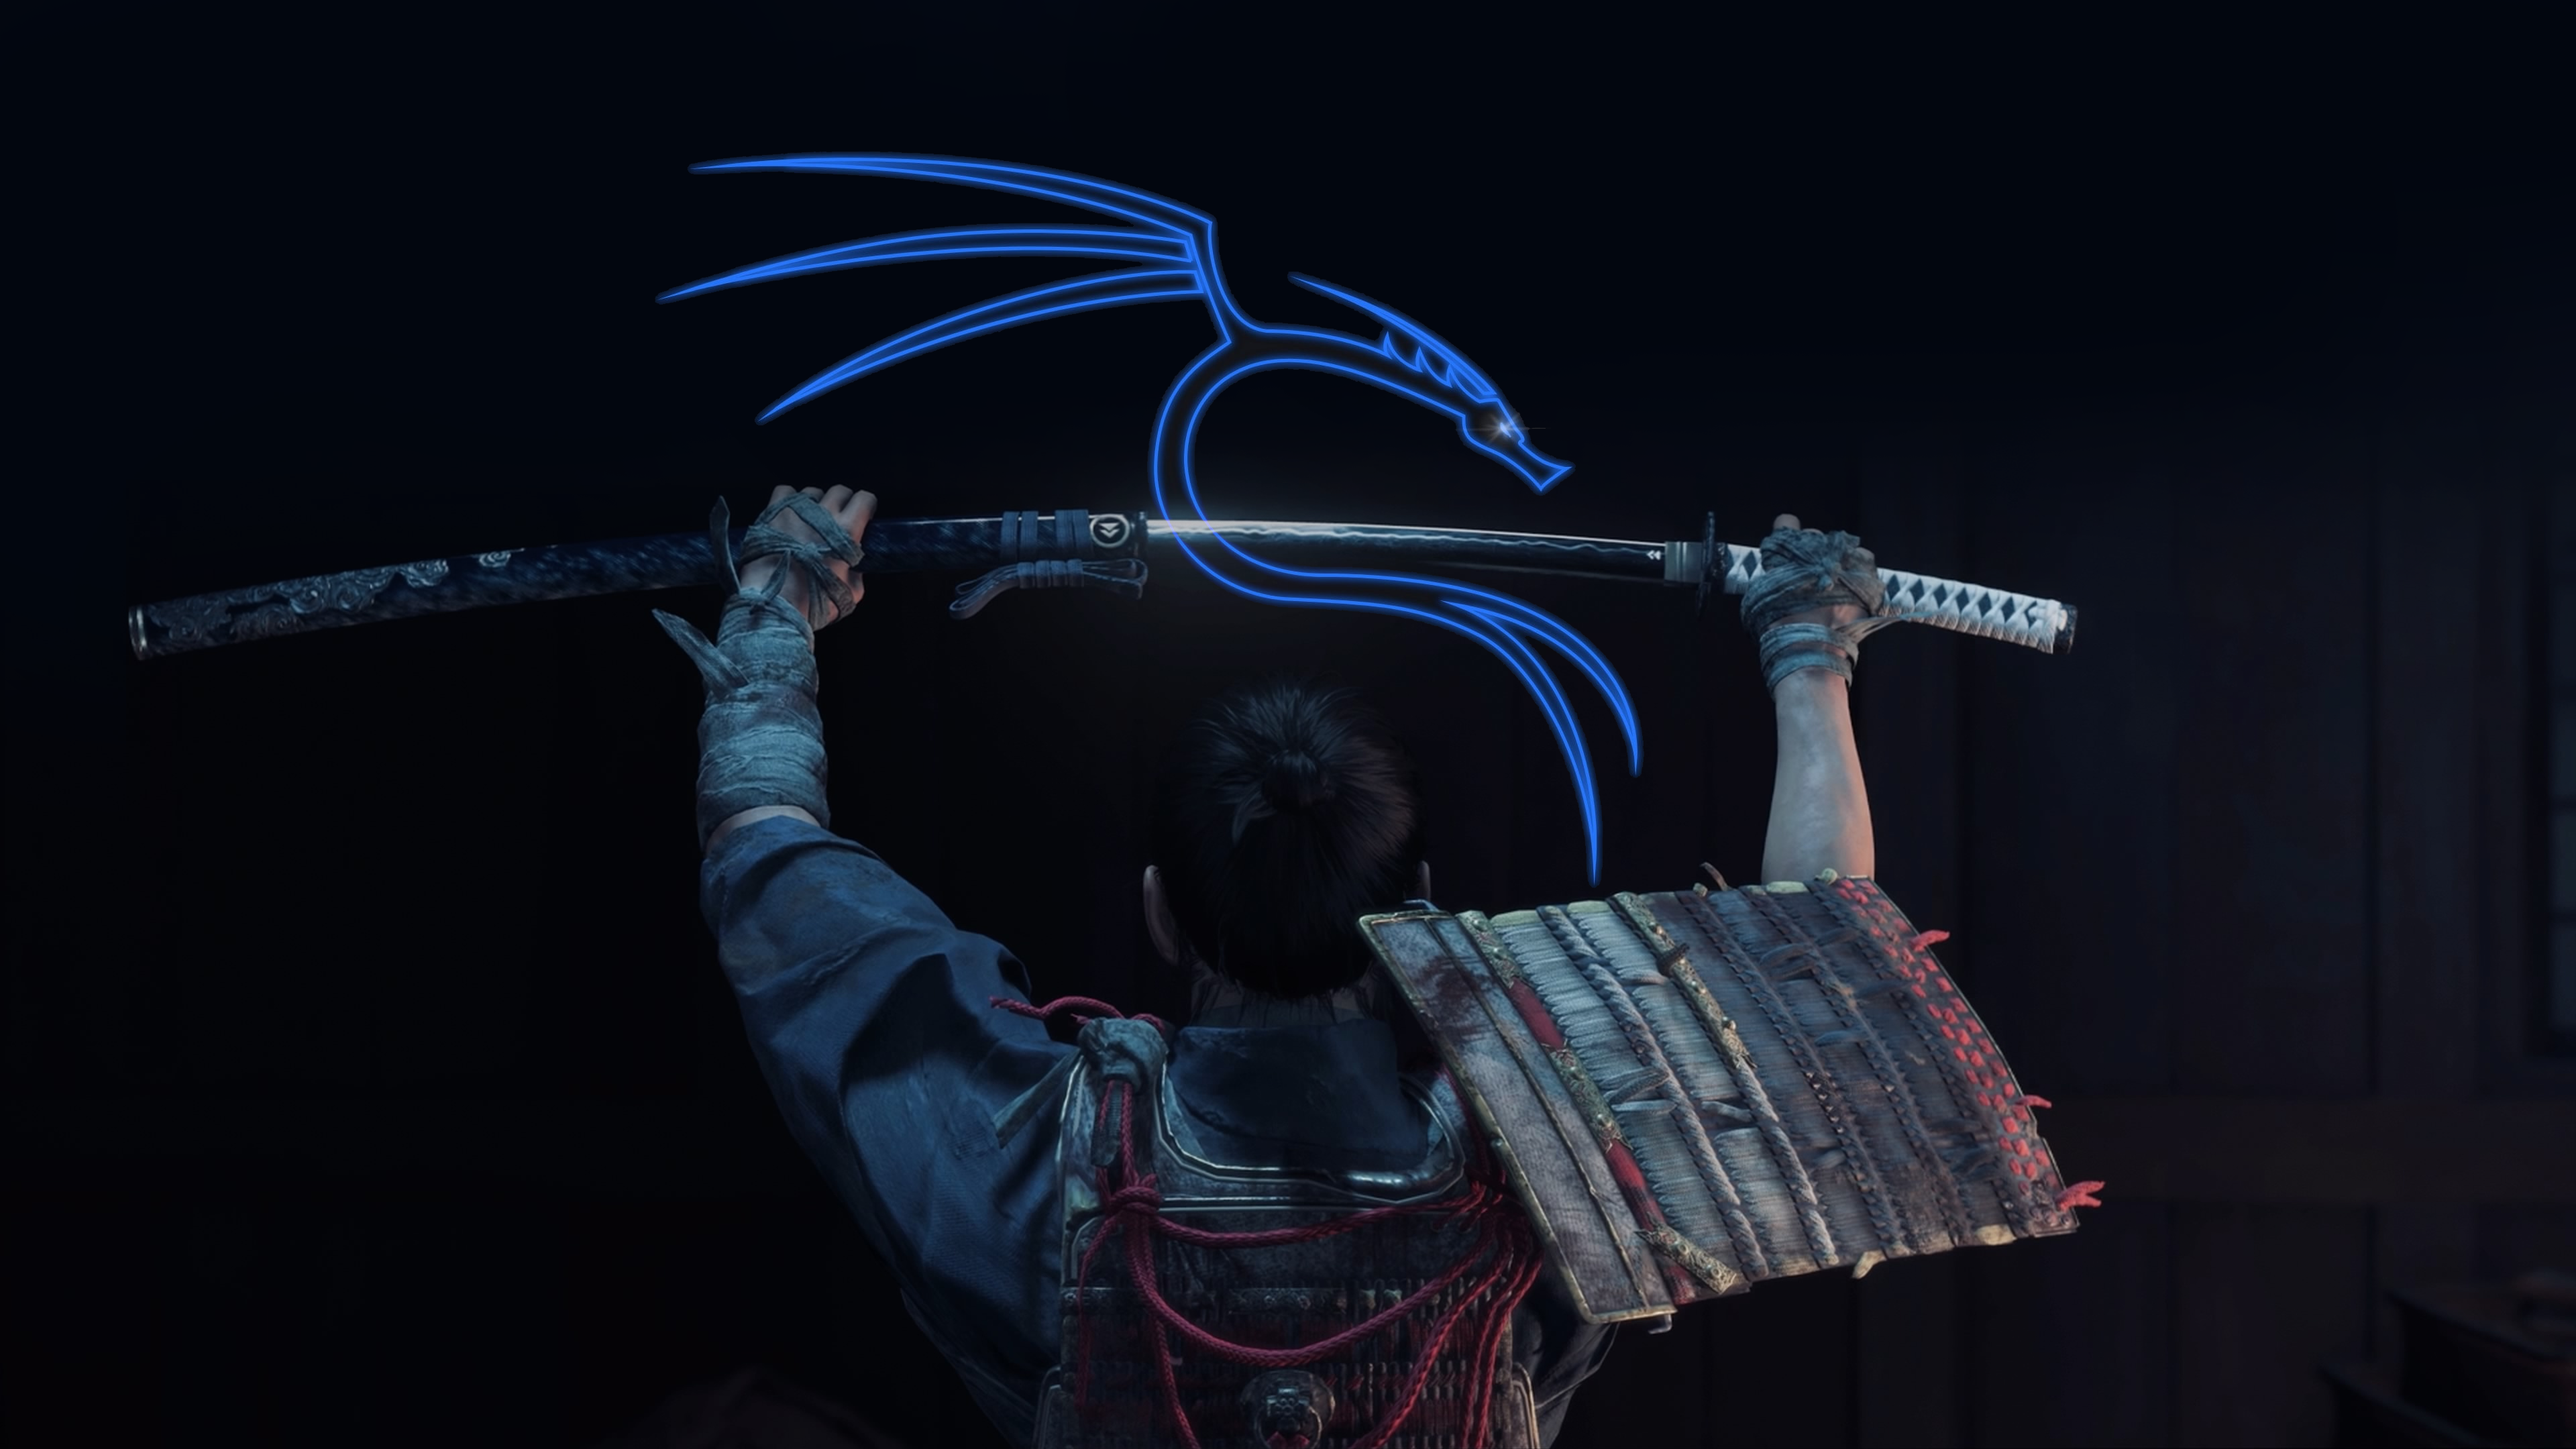 Kali Linux Ghost Of Tsushima Video Games Code Computer Security 3840x2160